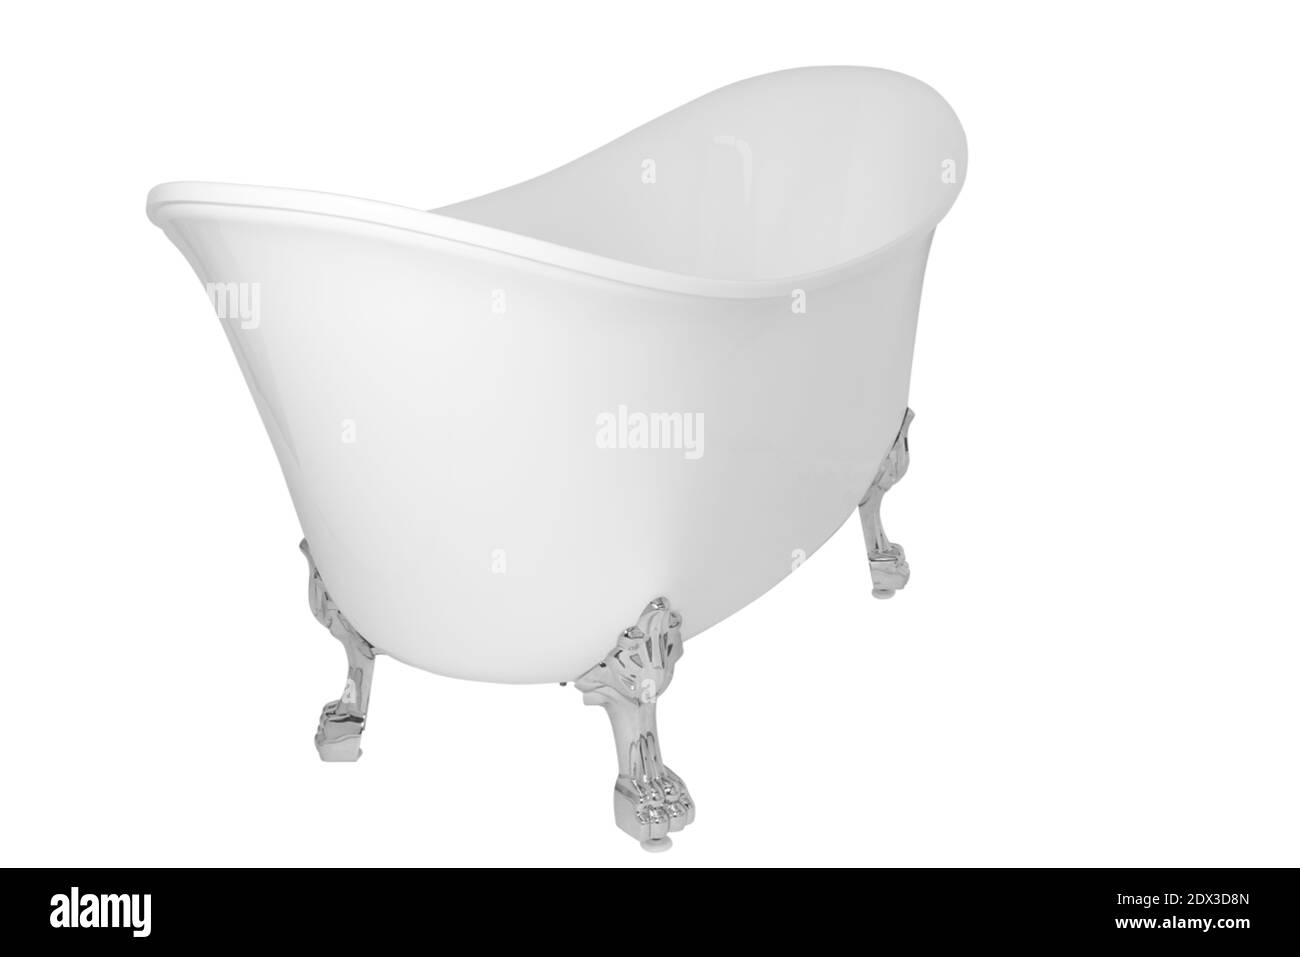 A modern white clawfoot bathtub isolated on a white background Stock Photo